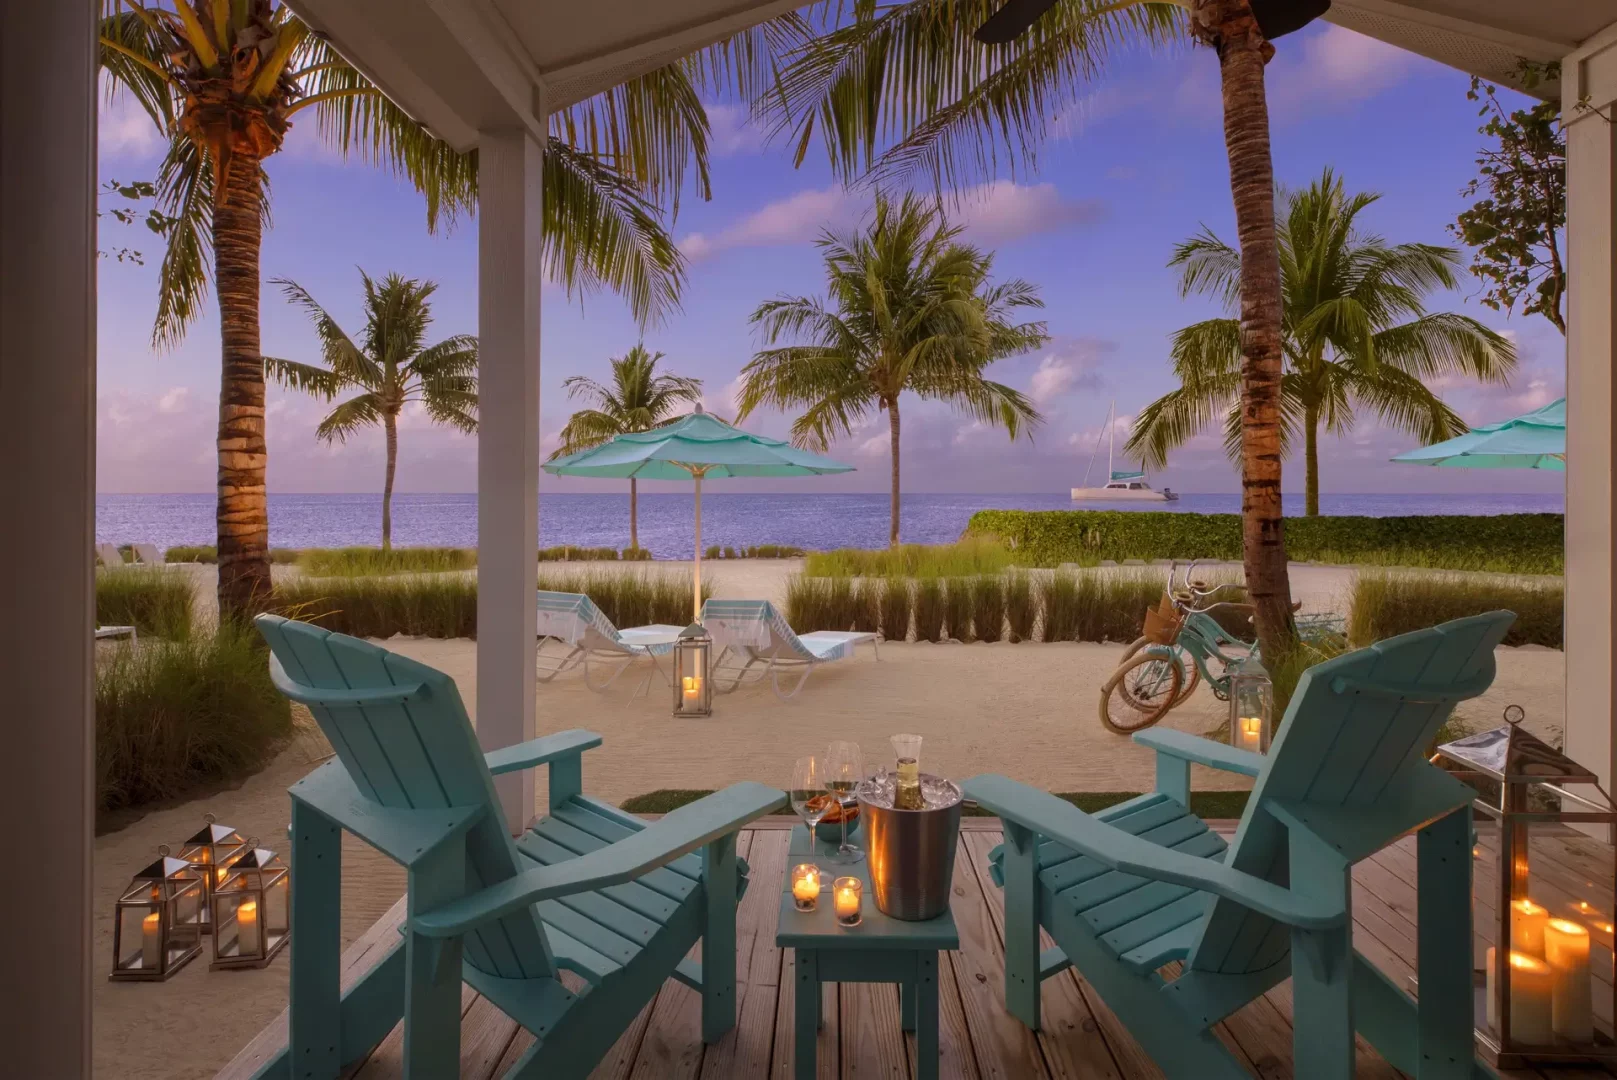 A patio with lounge chairs and champagne with a view of the beach, palm trees, umbrellas, and the ocean.